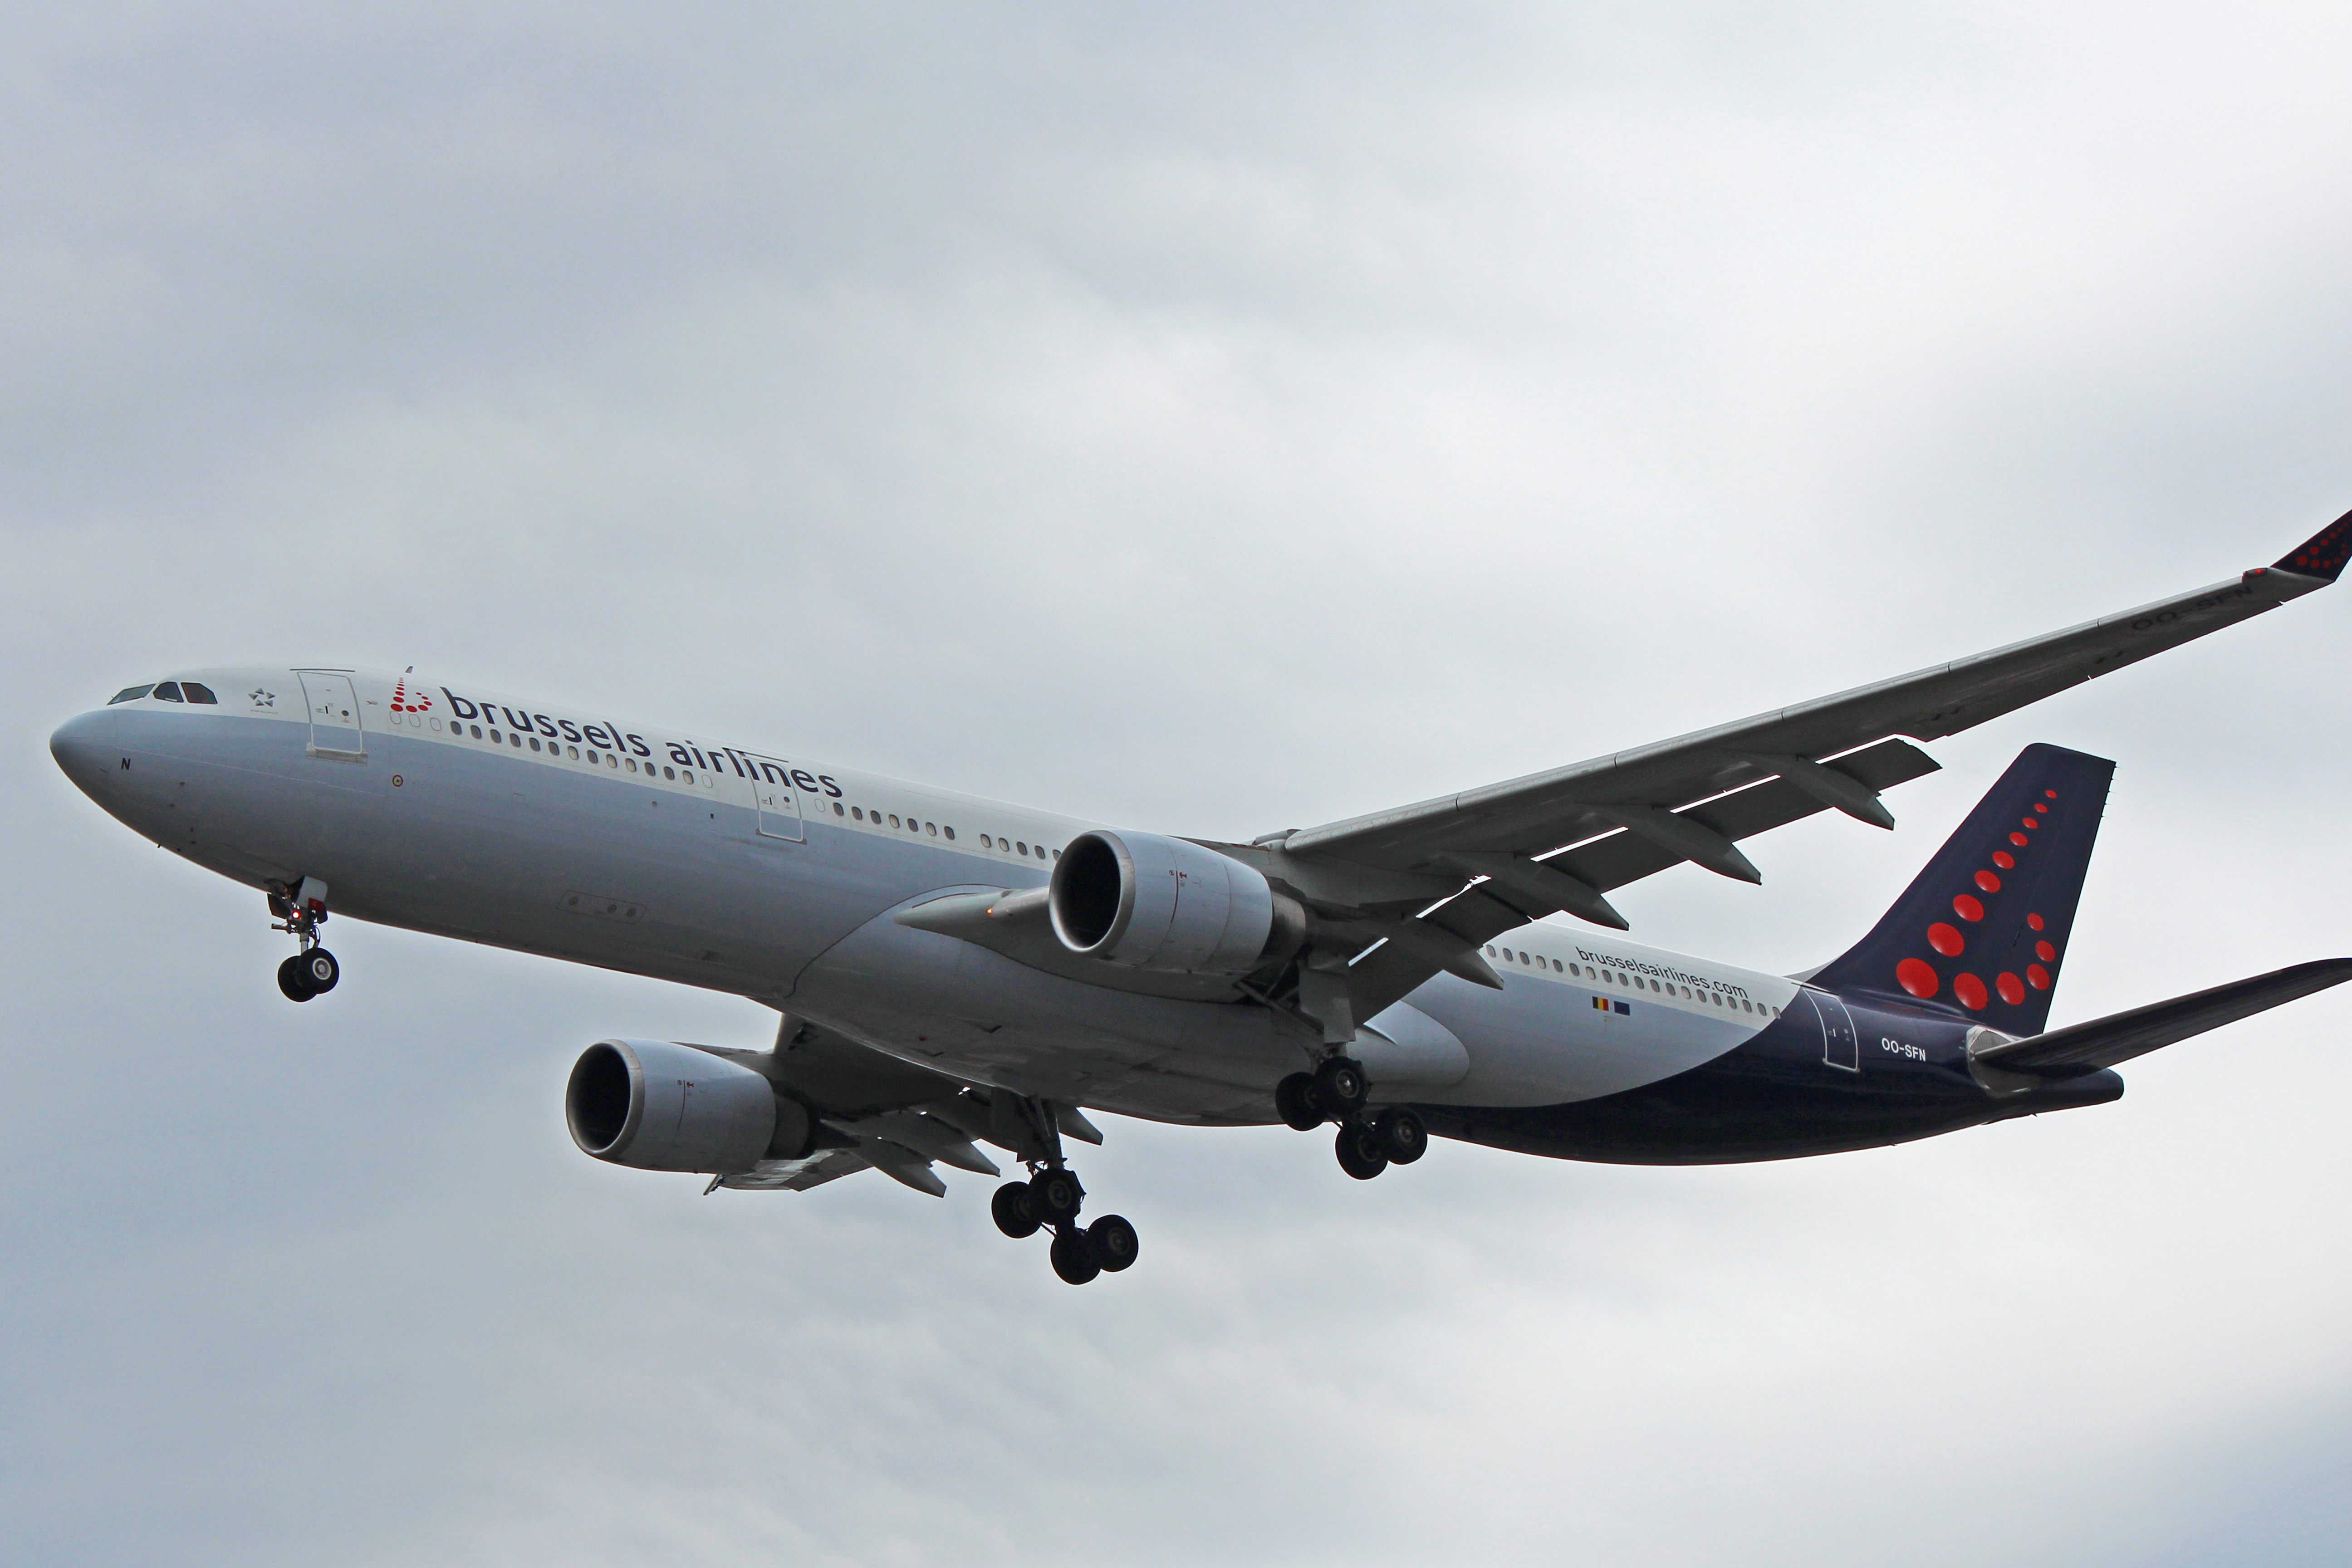 oo-sfn brussels airlines airbus a330-300 toronto yyz